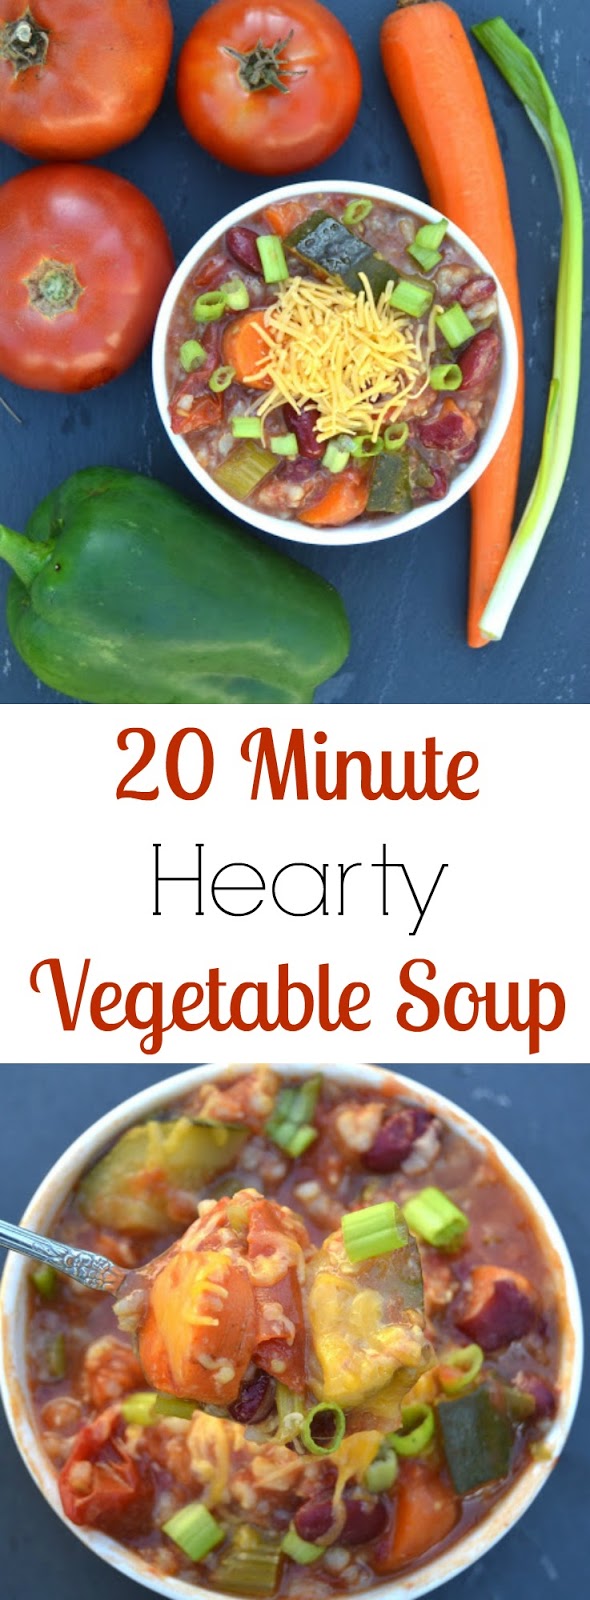 20 Minute Hearty Vegetable Soup- a loaded vegetable soup that is quick and filling. Make ahead of time and enjoy all week long! 